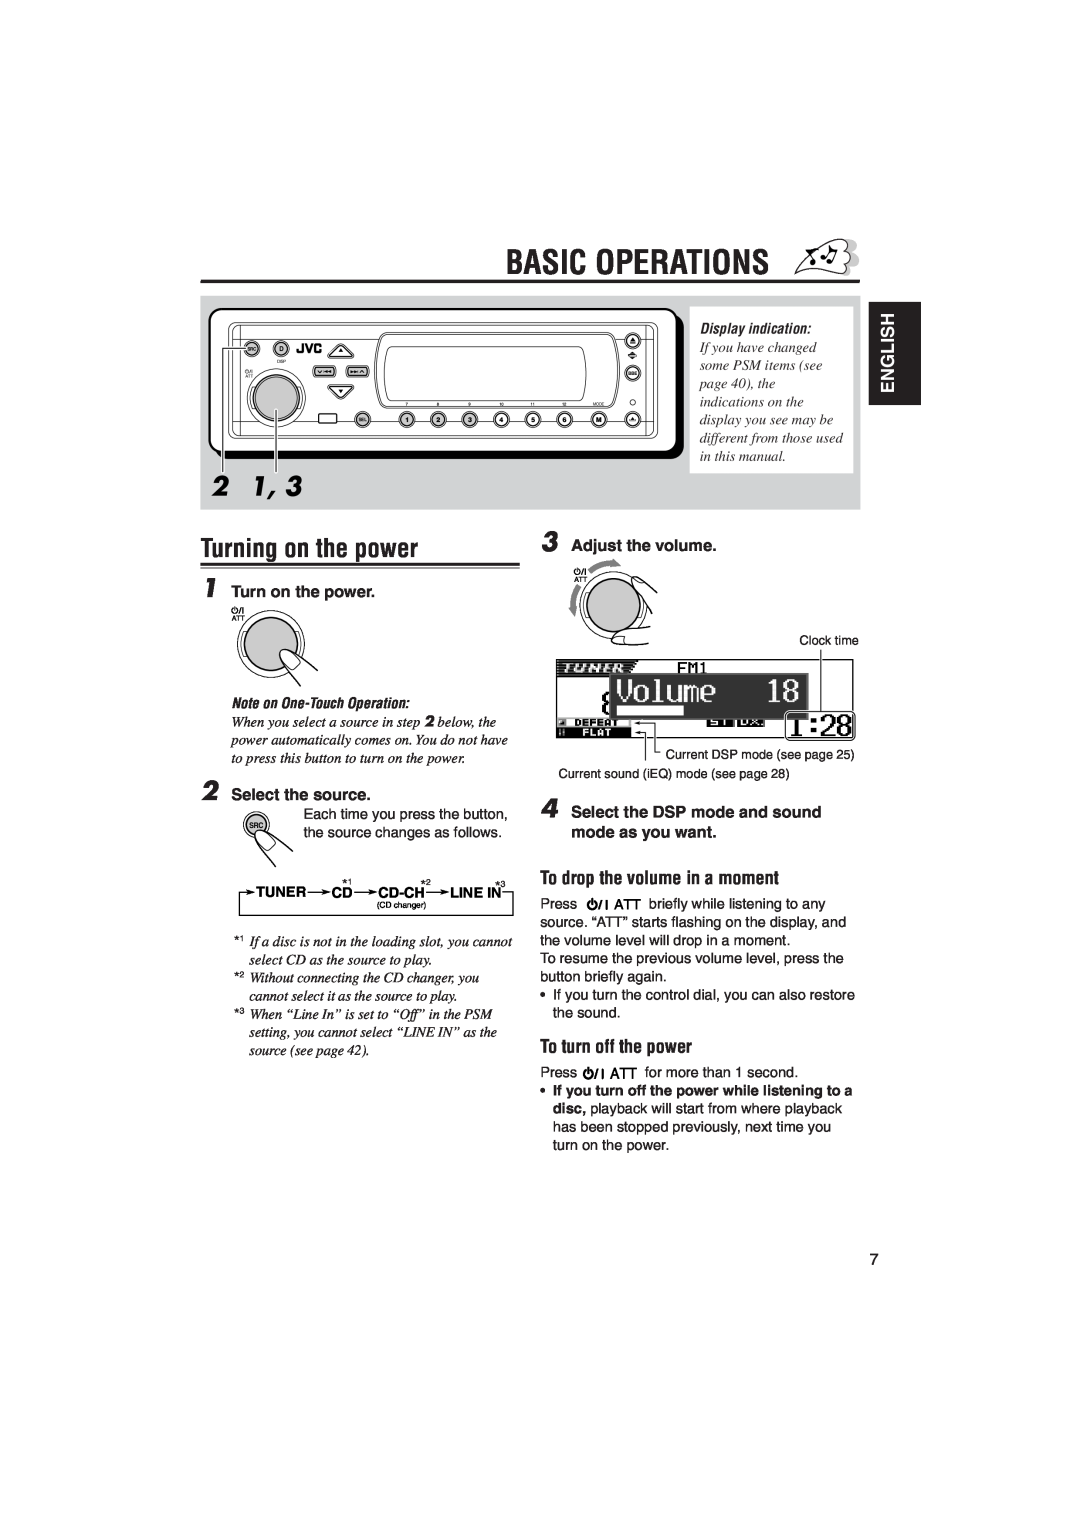 JVC KD-SH9105 manual Basic Operations, Turning on the power, English, To drop the volume in a moment, To turn off the power 